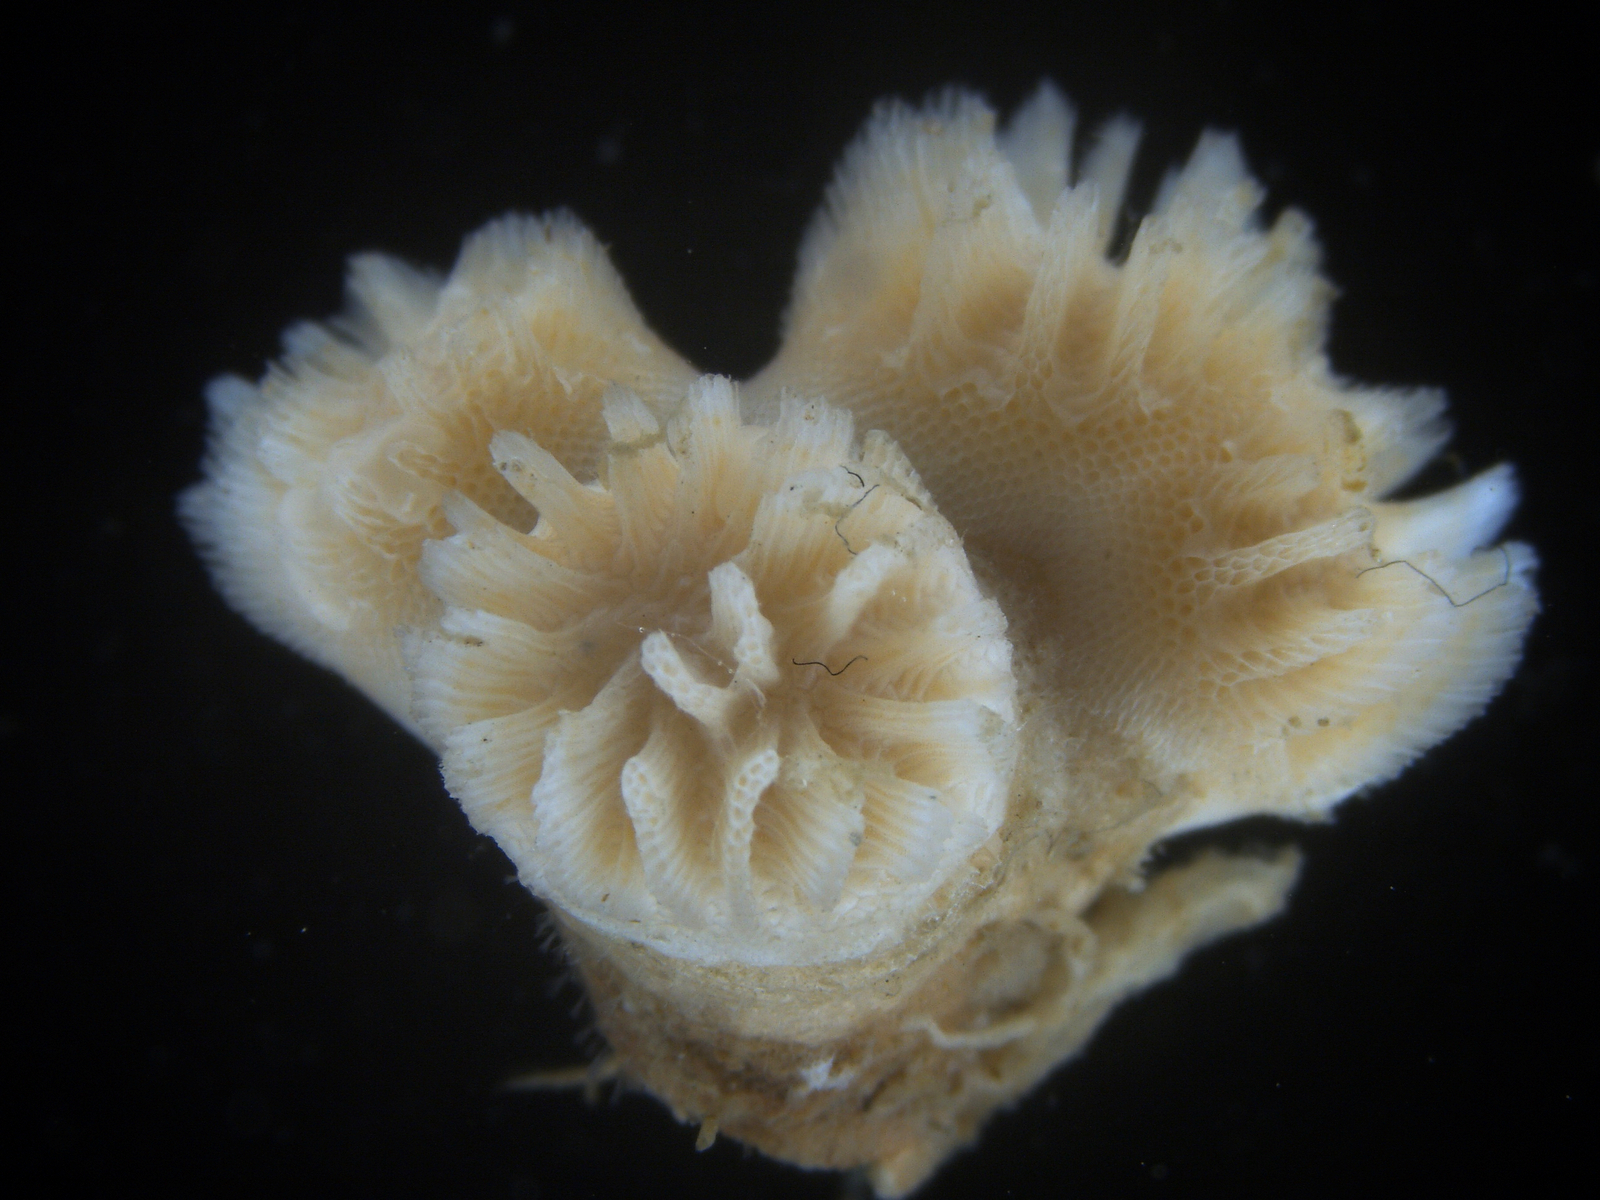 a colony of clacified bryozoa; it looks a bit like a piece of coral